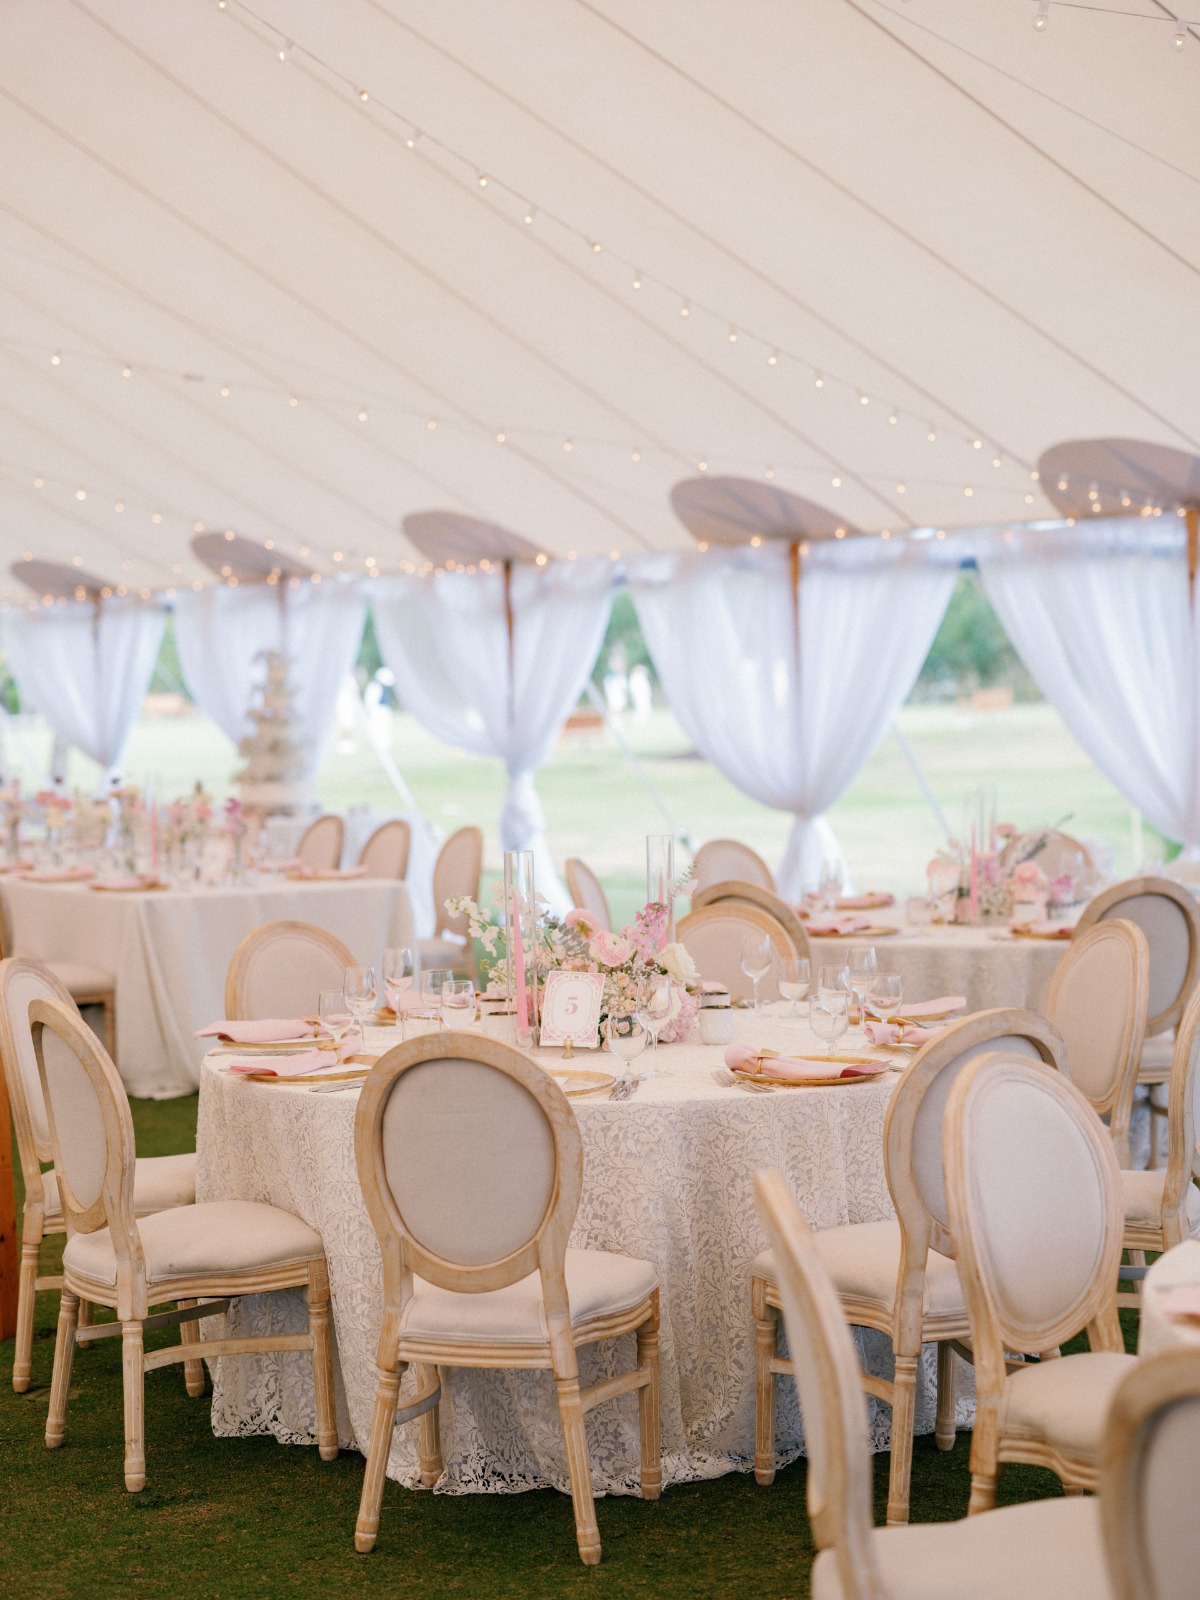 Floor to ceiling photo of reception tent including table and centerpiece